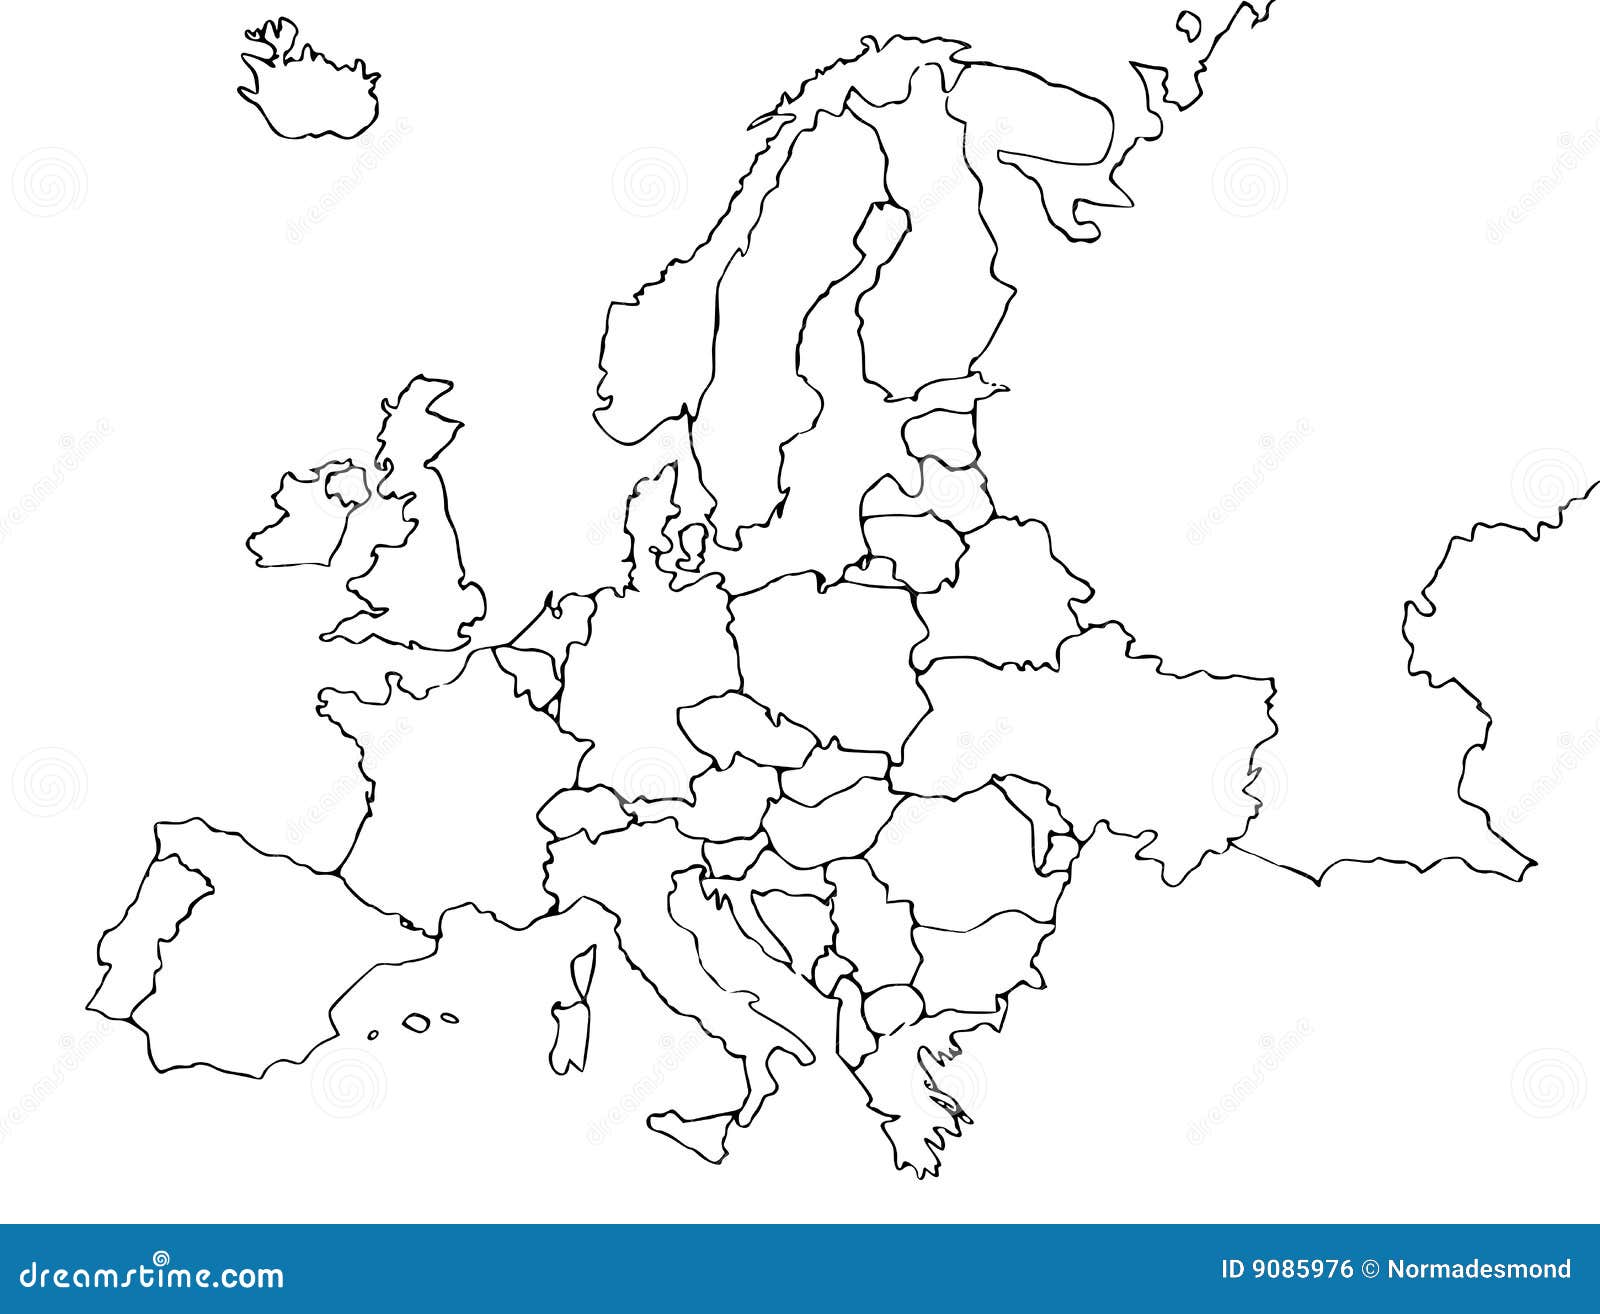 Image Result For Political Map Of Europe 1914